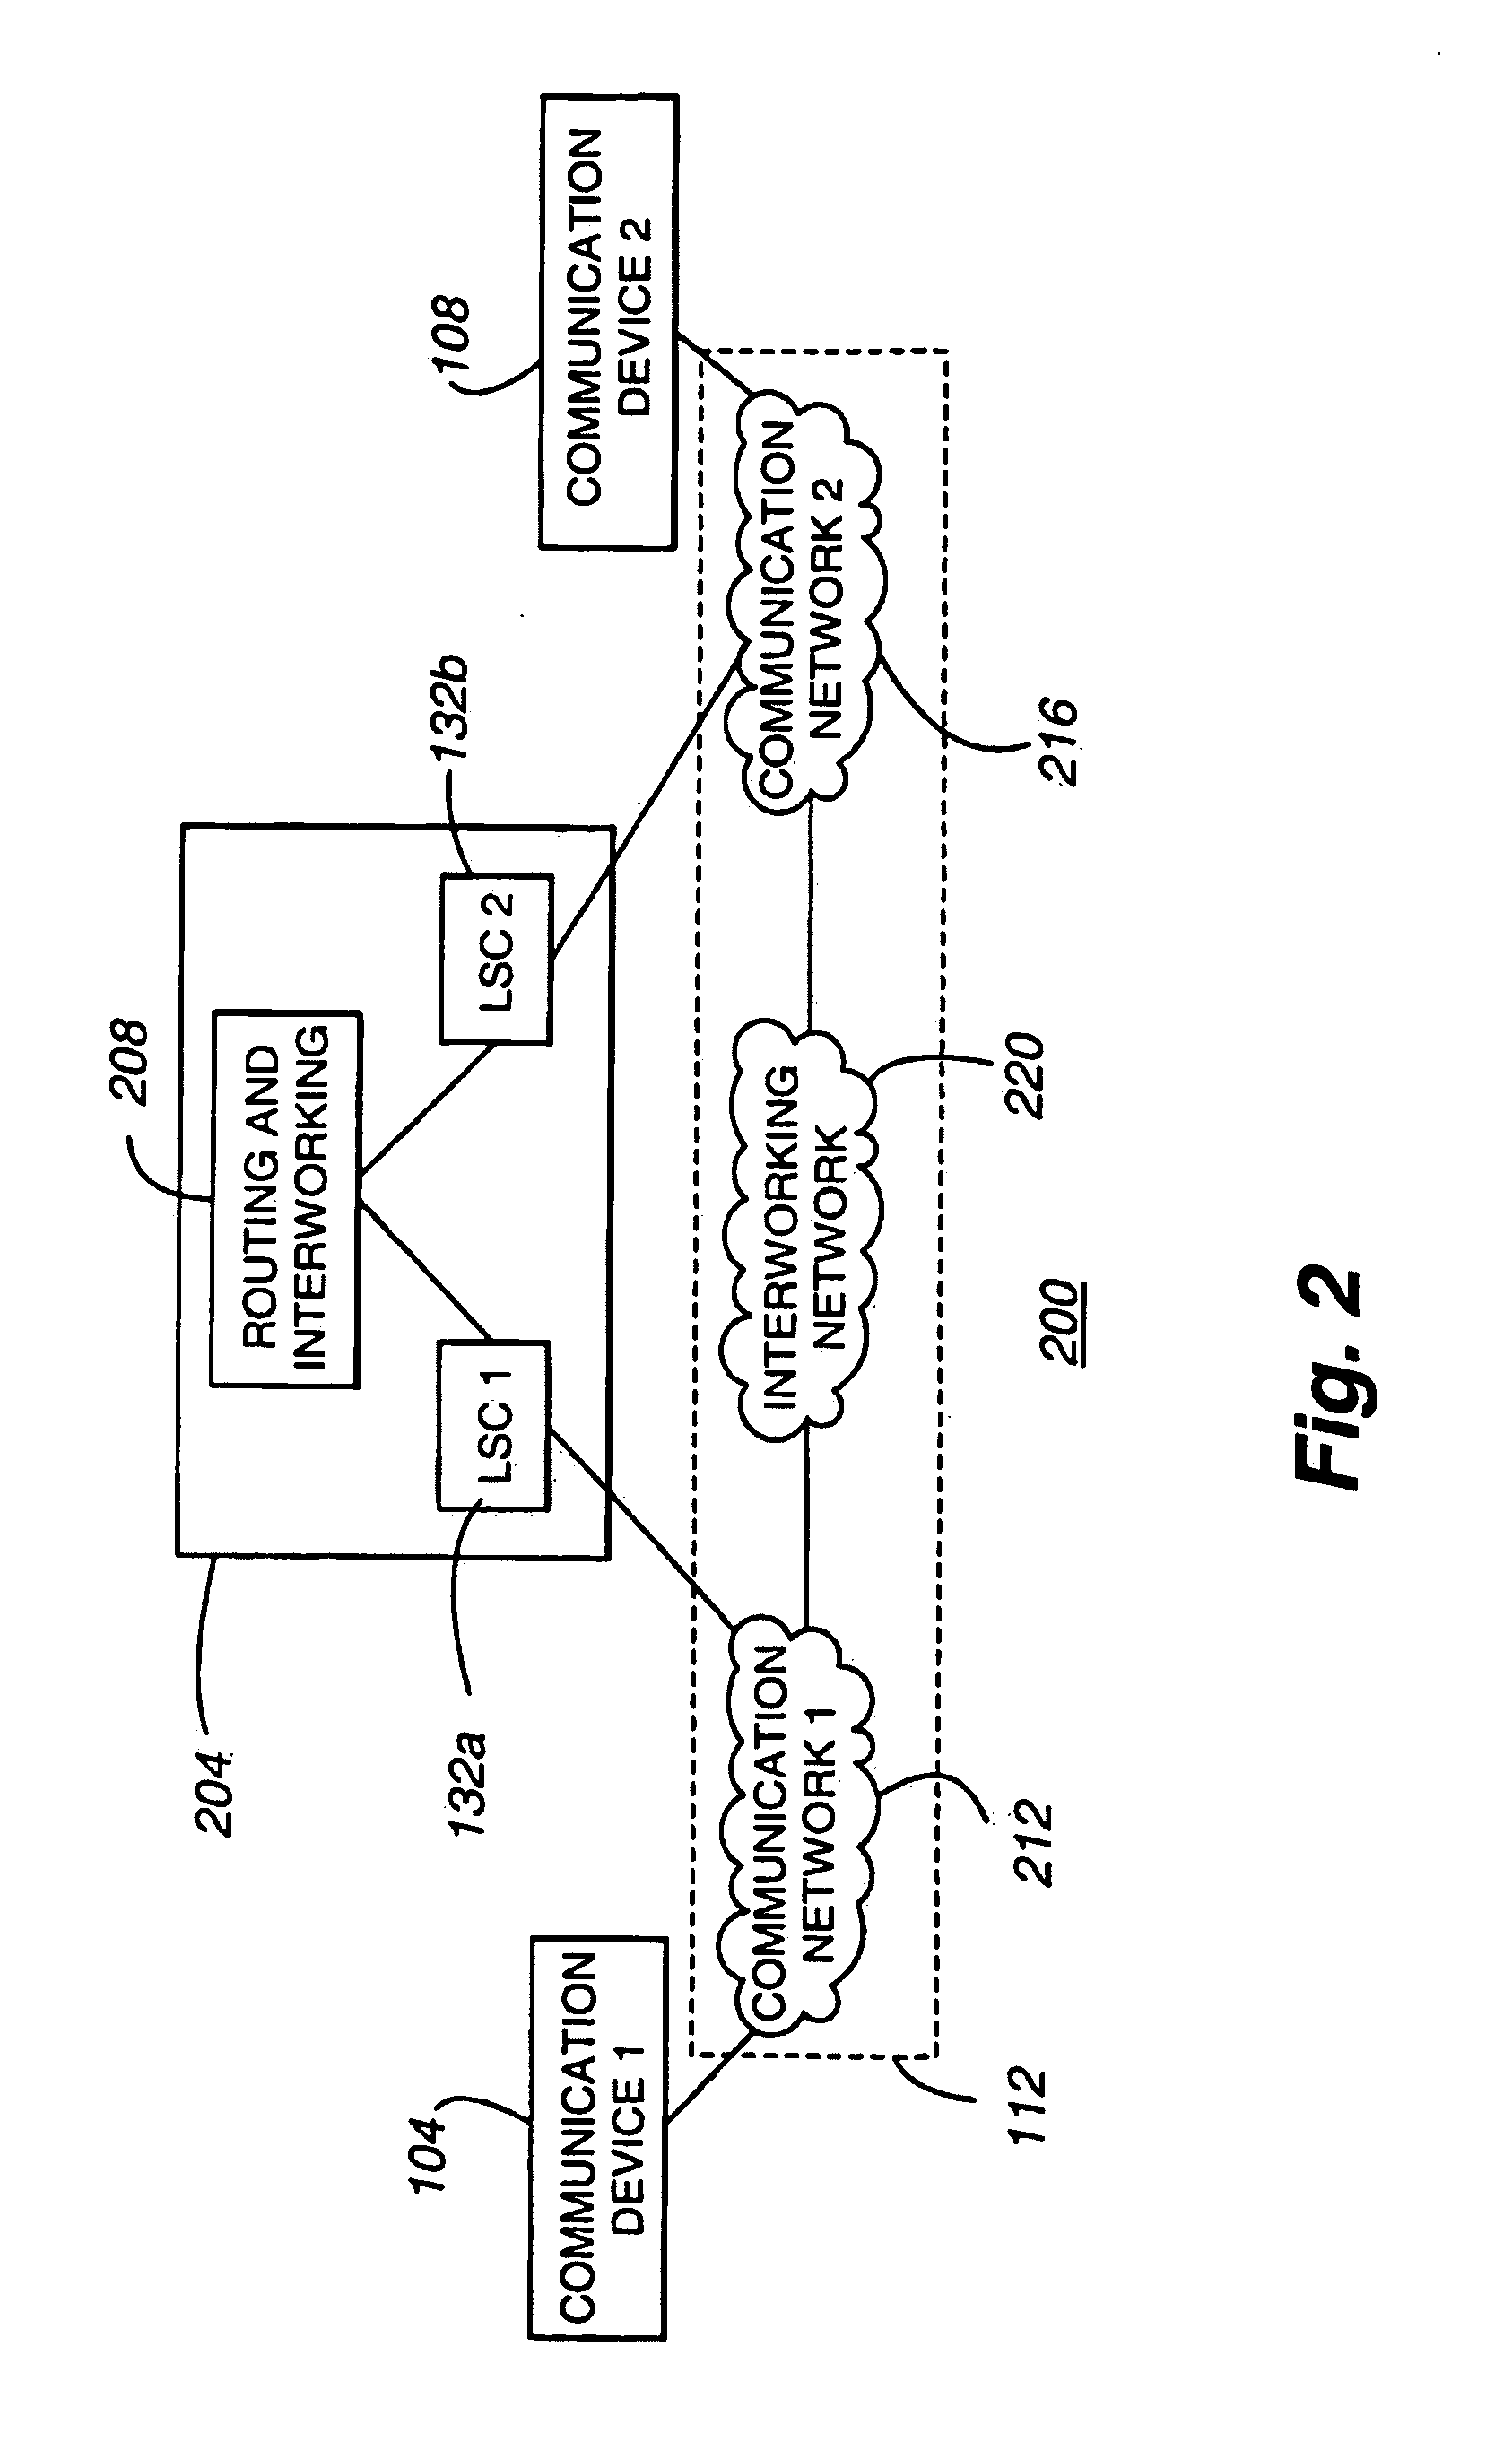 Apparatus and method for displaying caller ID with location information